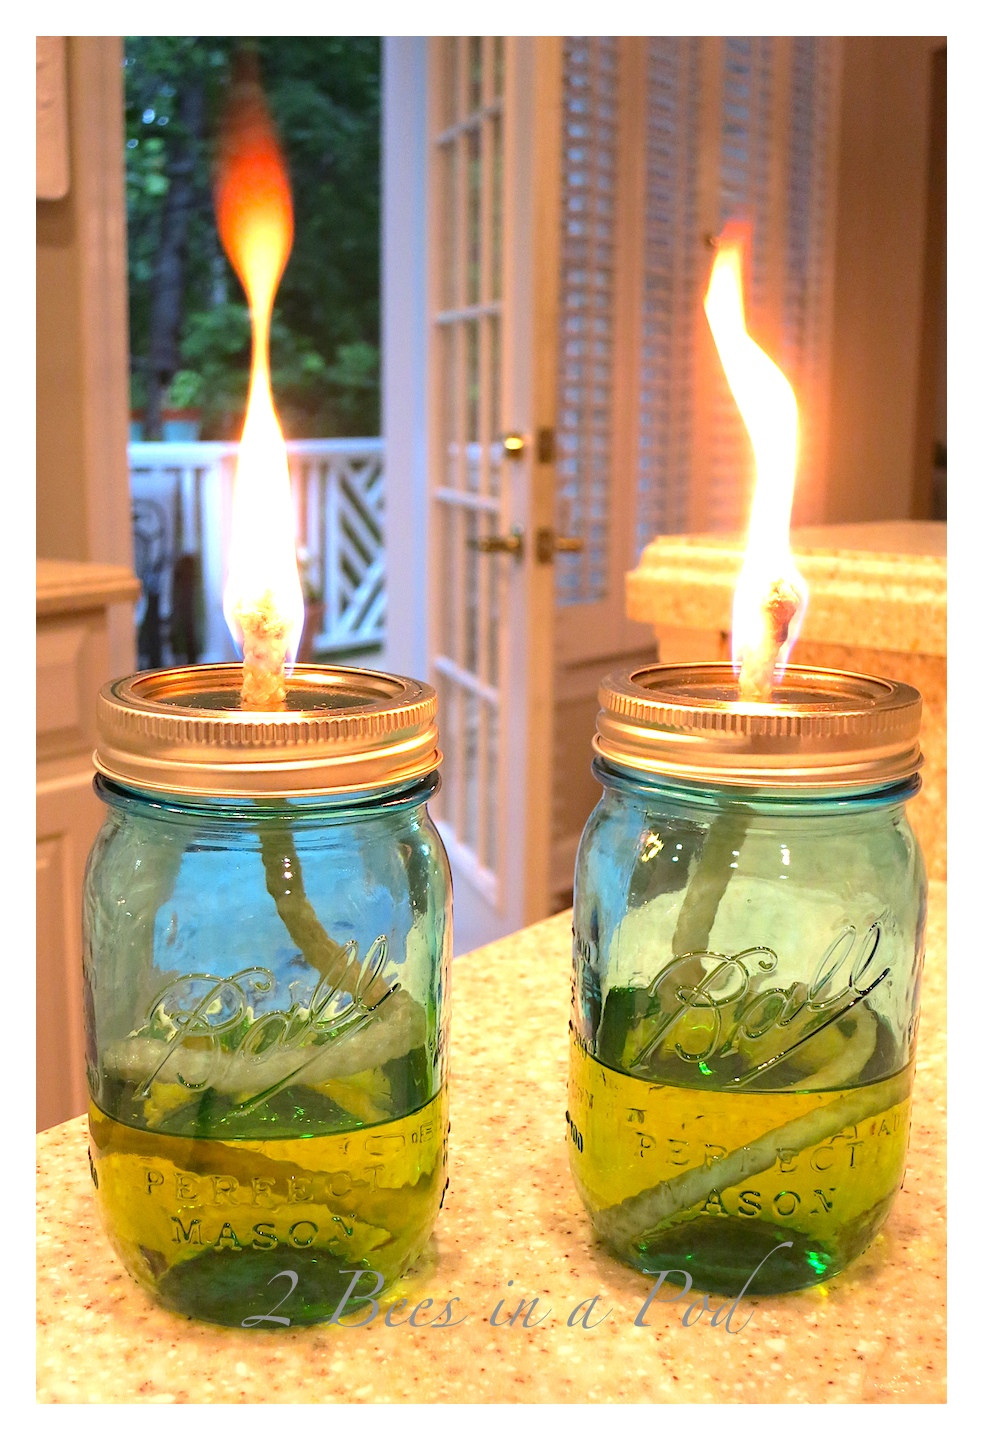 Best ideas about DIY Oil Lamp
. Save or Pin DIY Mason Jar Citronella Candle Oil Lamp 2 Bees in a Pod Now.